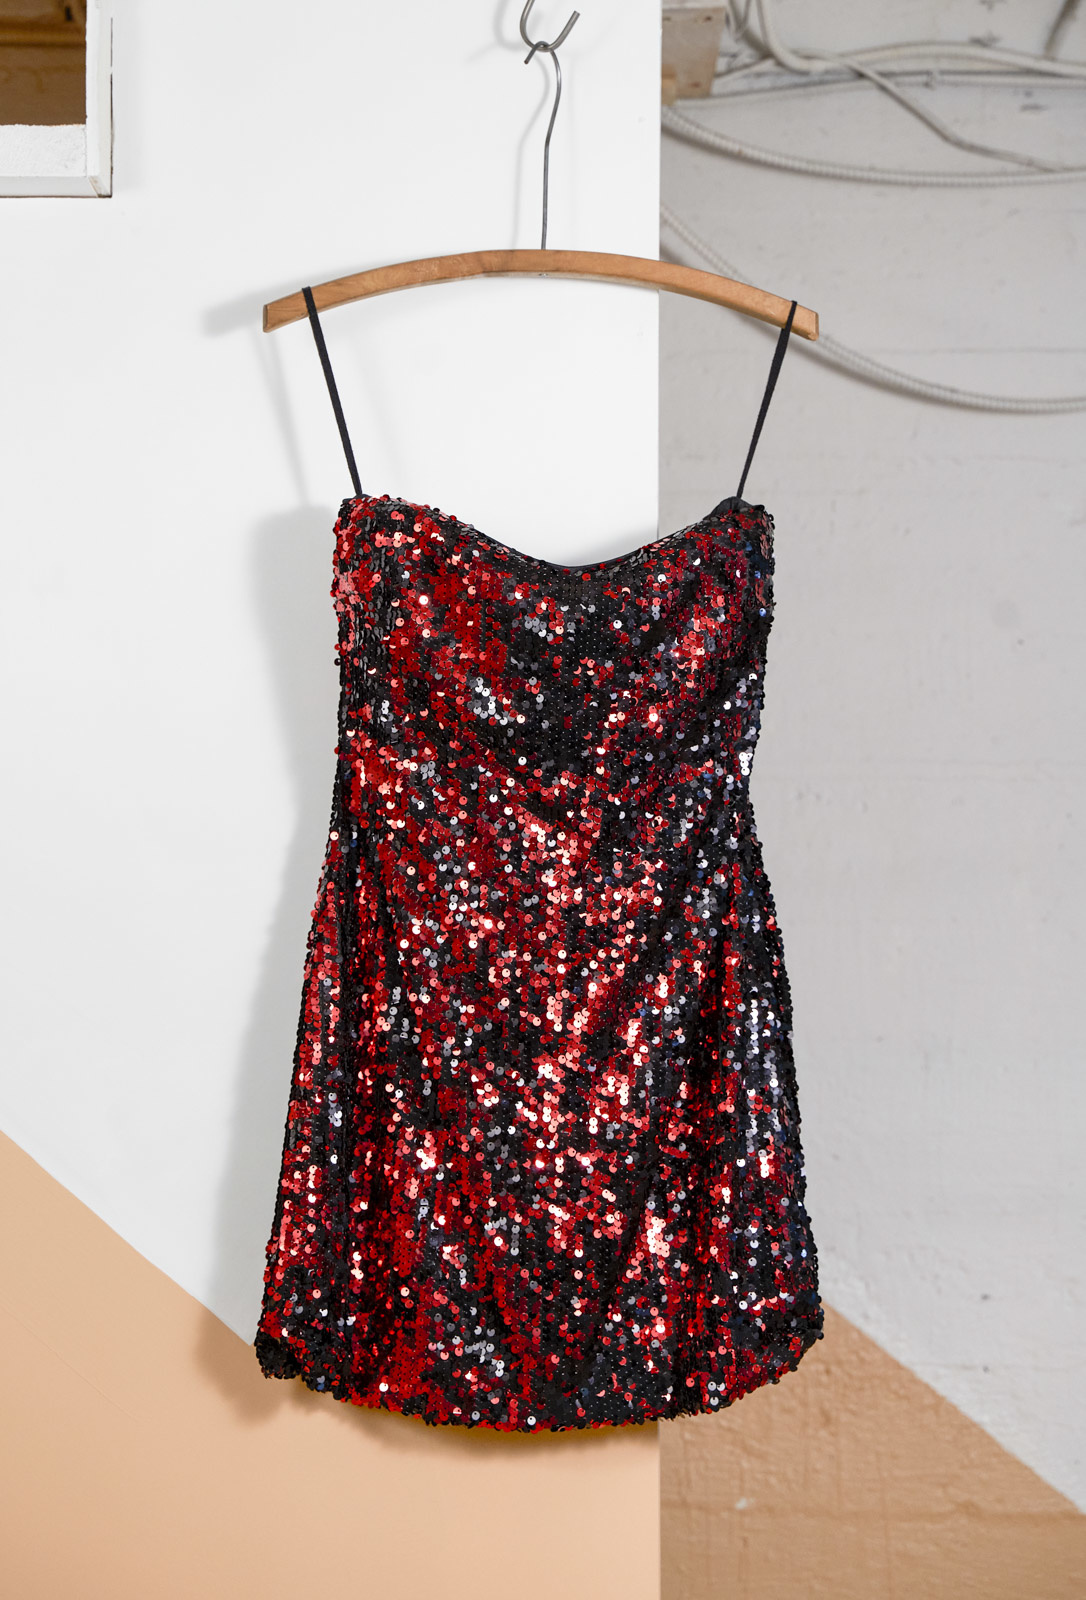 Black and Red Sequin Strapless Dress